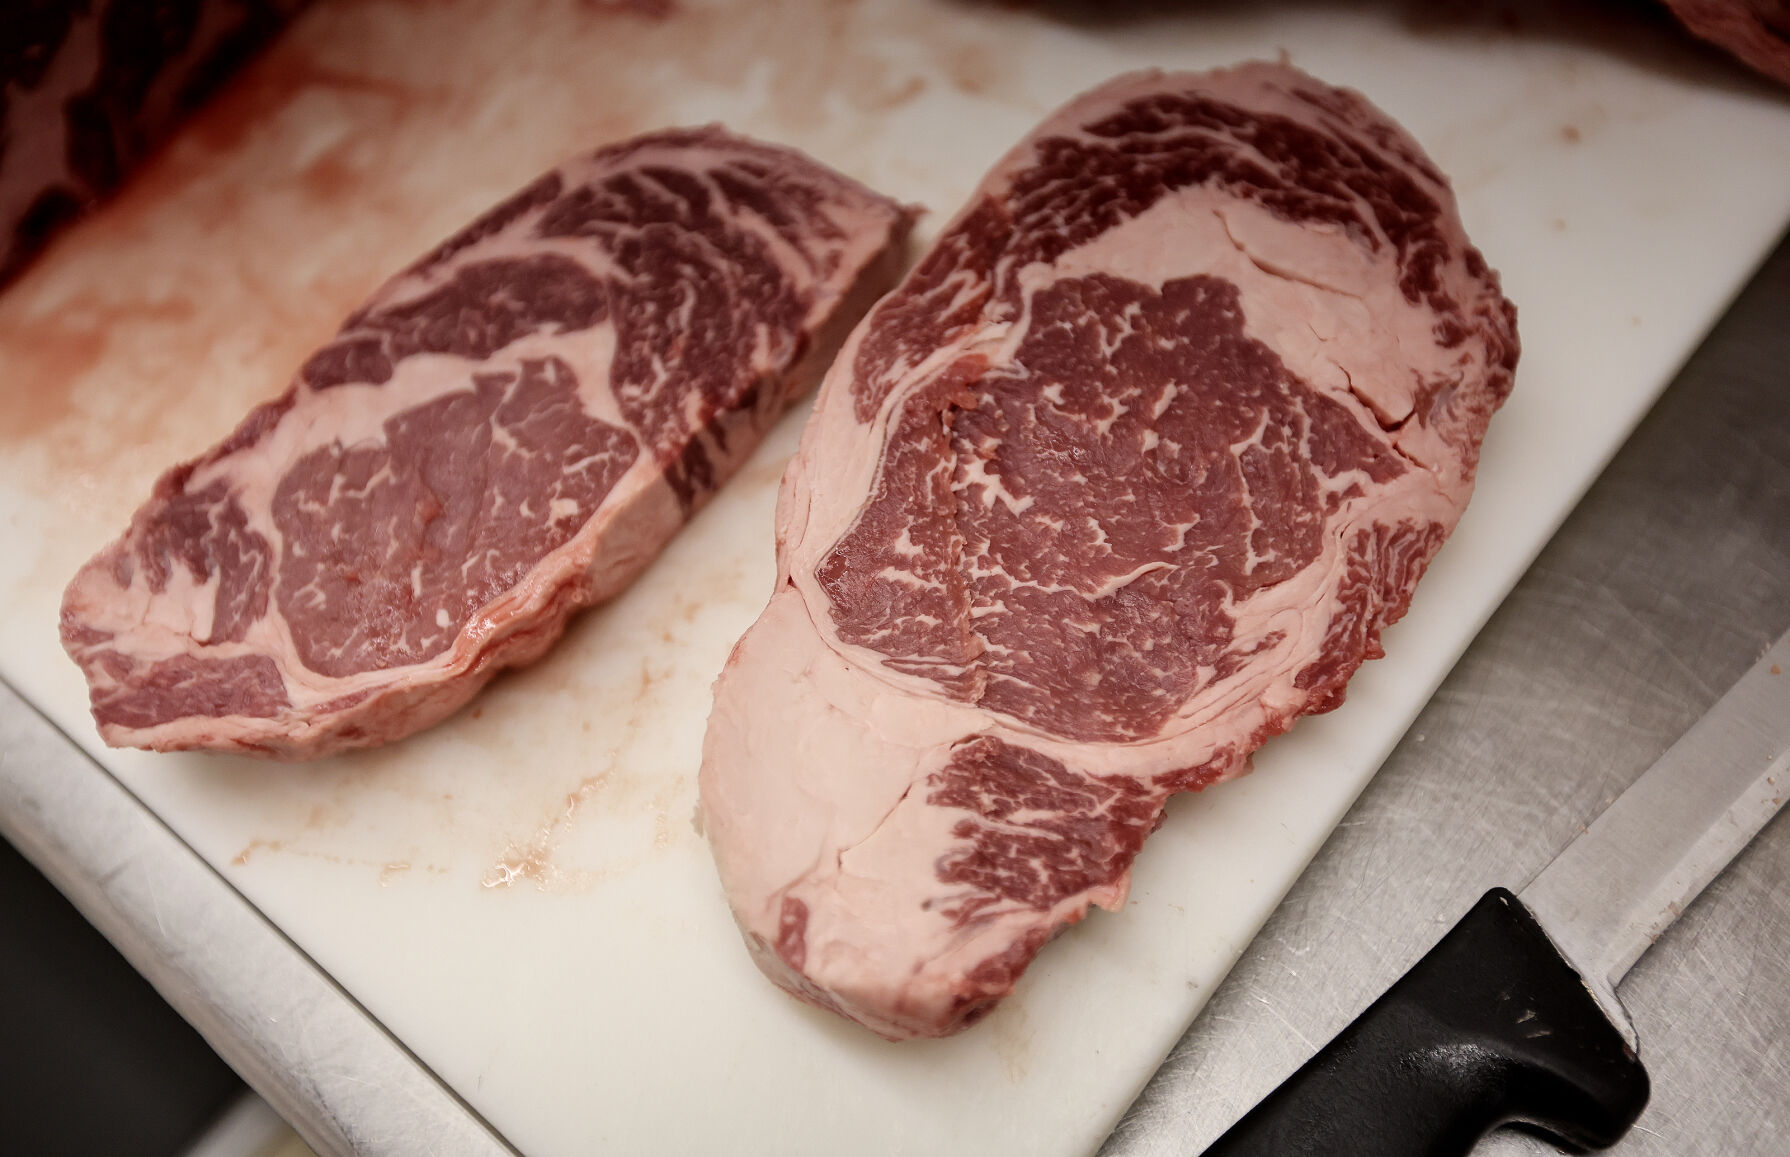 Jeff Cremer says the marbling in the meat is something to look for when shopping for a quality steak at Cremer’s in Dubuque.    PHOTO CREDIT: Dave Kettering/Telegraph Herald